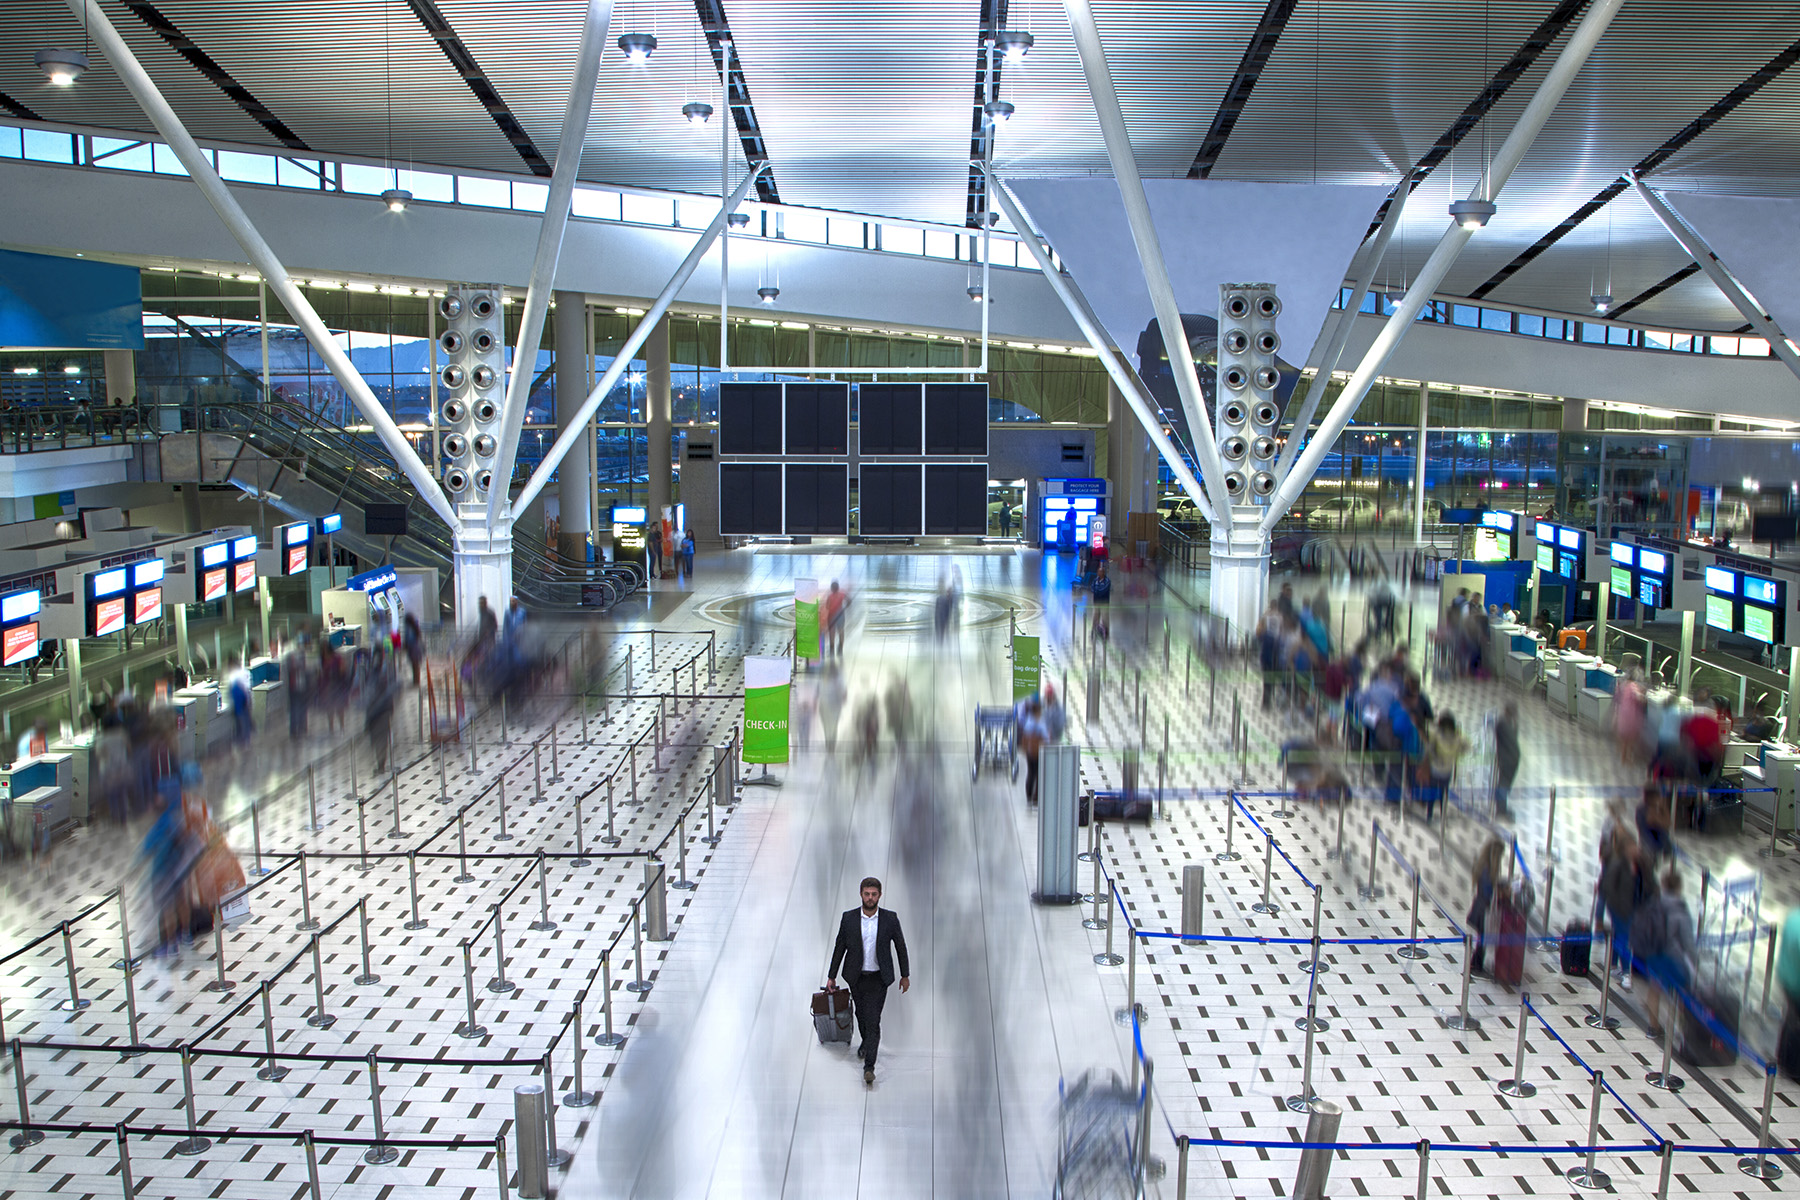 Wide, high angle shot of an airport terminal building with a motion blur effect